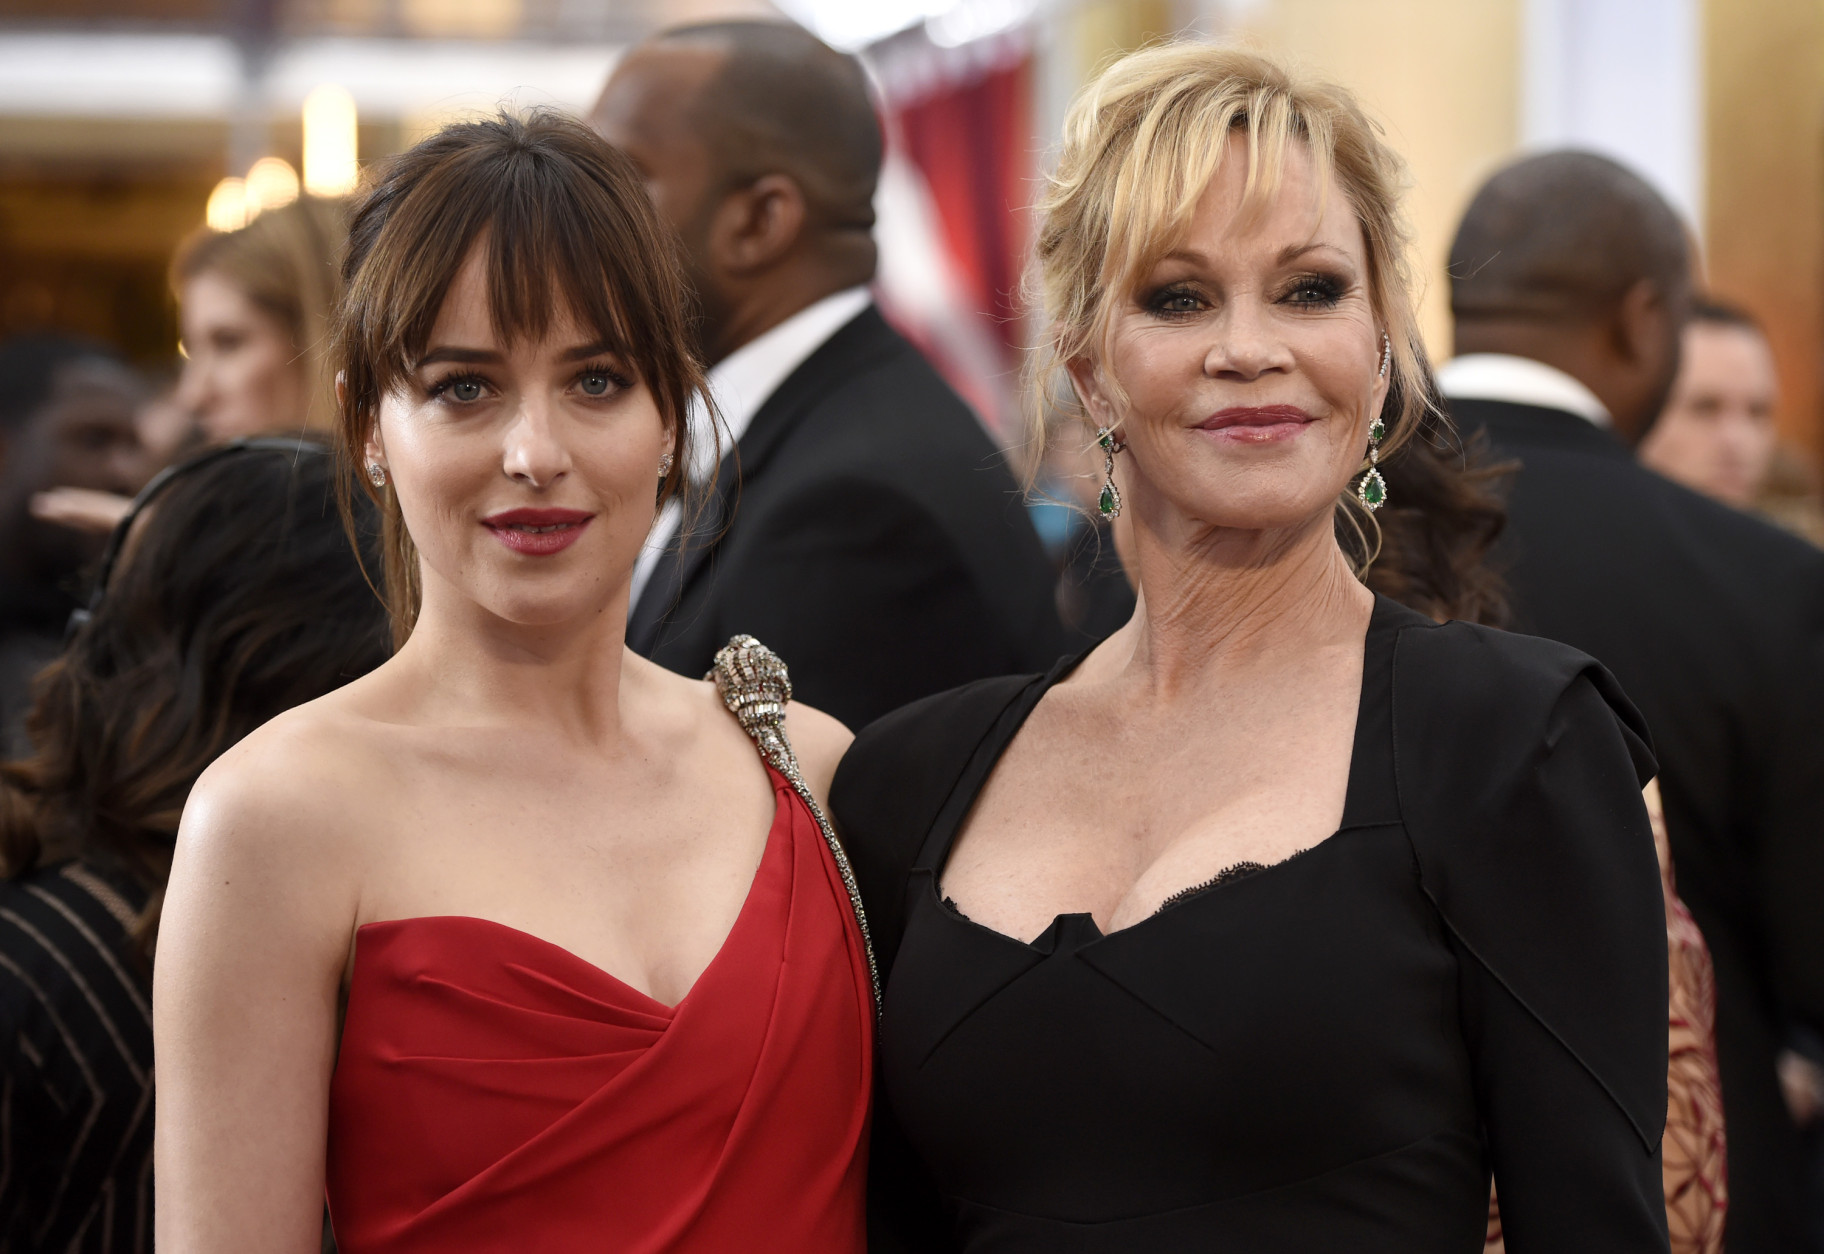 Dakota Johnson, left, and Melanie Griffith arrive at the Oscars on Sunday, Feb. 22, 2015, at the Dolby Theatre in Los Angeles. (Photo by Chris Pizzello/Invision/AP)